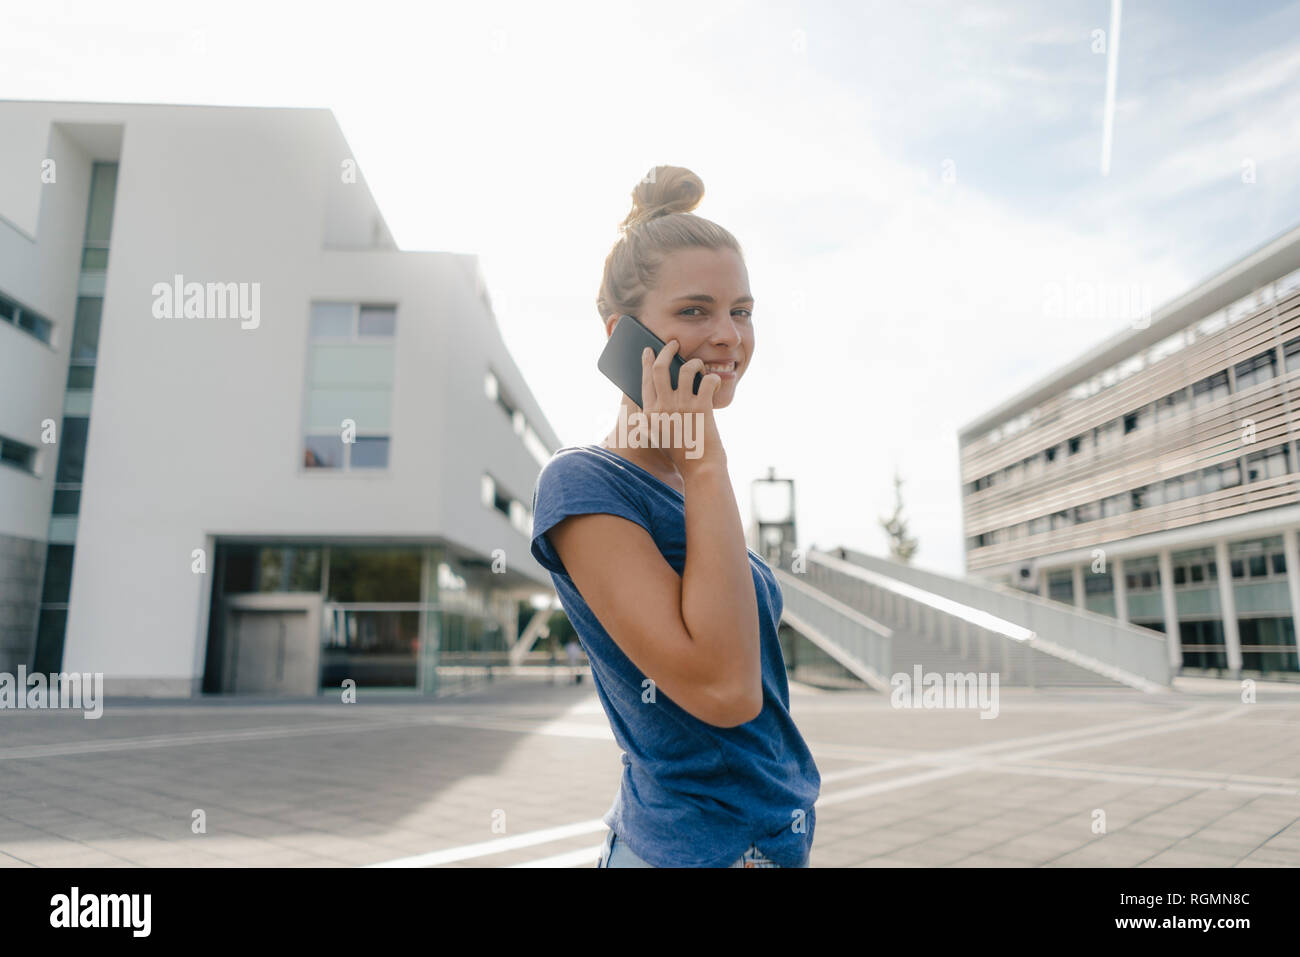 Netherlands, Maastricht, smiling young woman on cell phone in the city Stock Photo